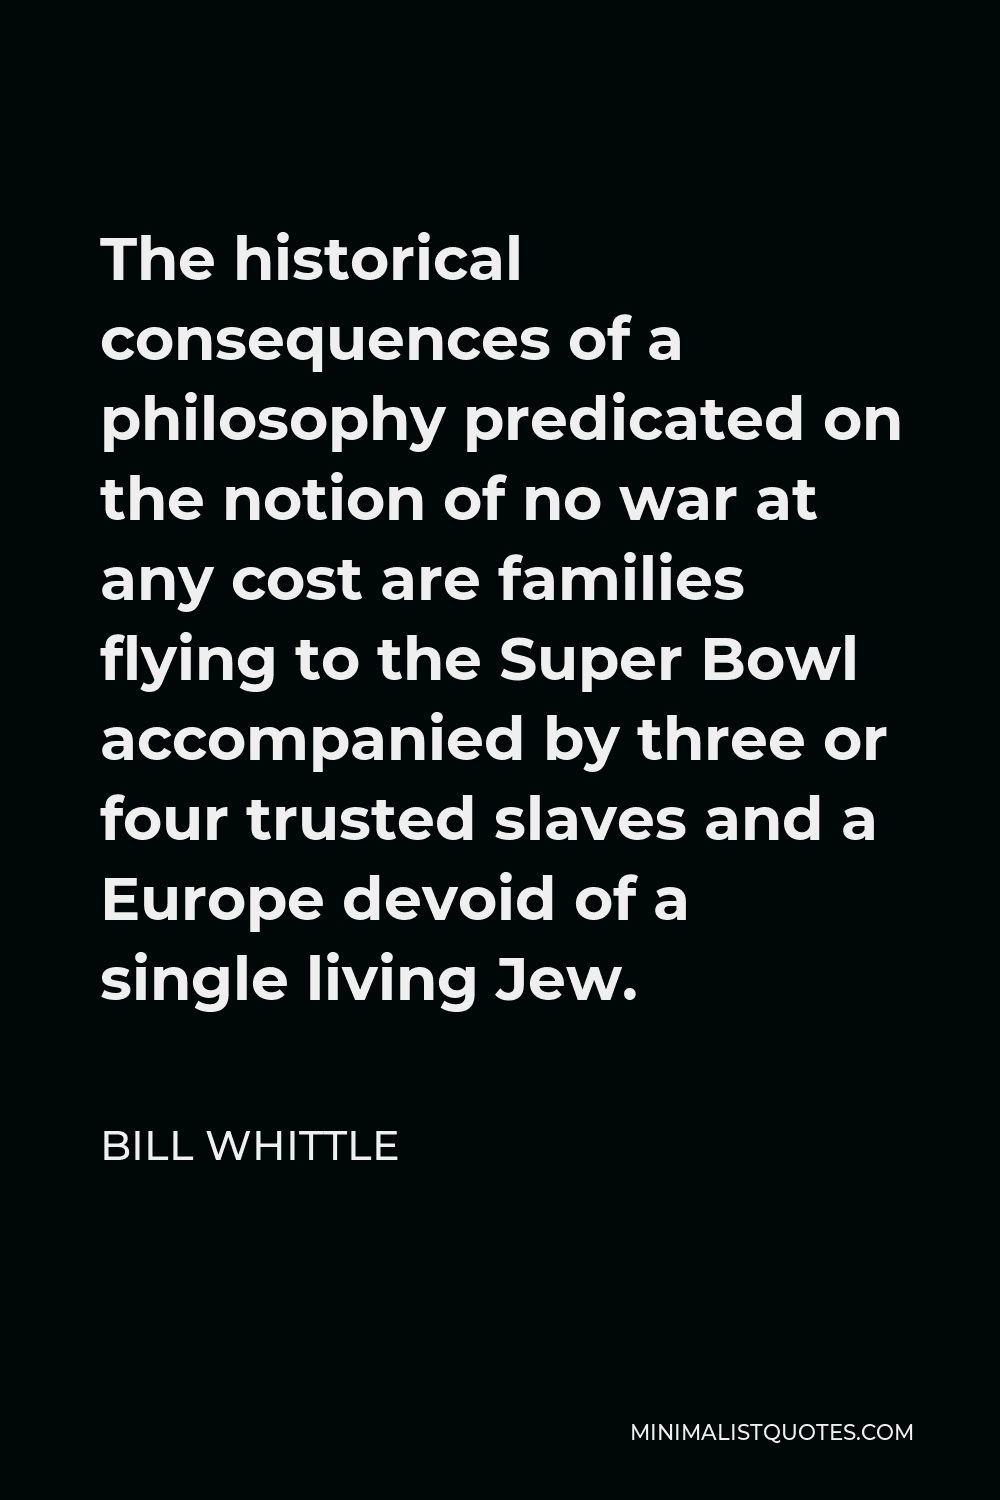 Bill Whittle Quote - The historical consequences of a philosophy predicated on the notion of no war at any cost are families flying to the Super Bowl accompanied by three or four trusted slaves and a Europe devoid of a single living Jew.